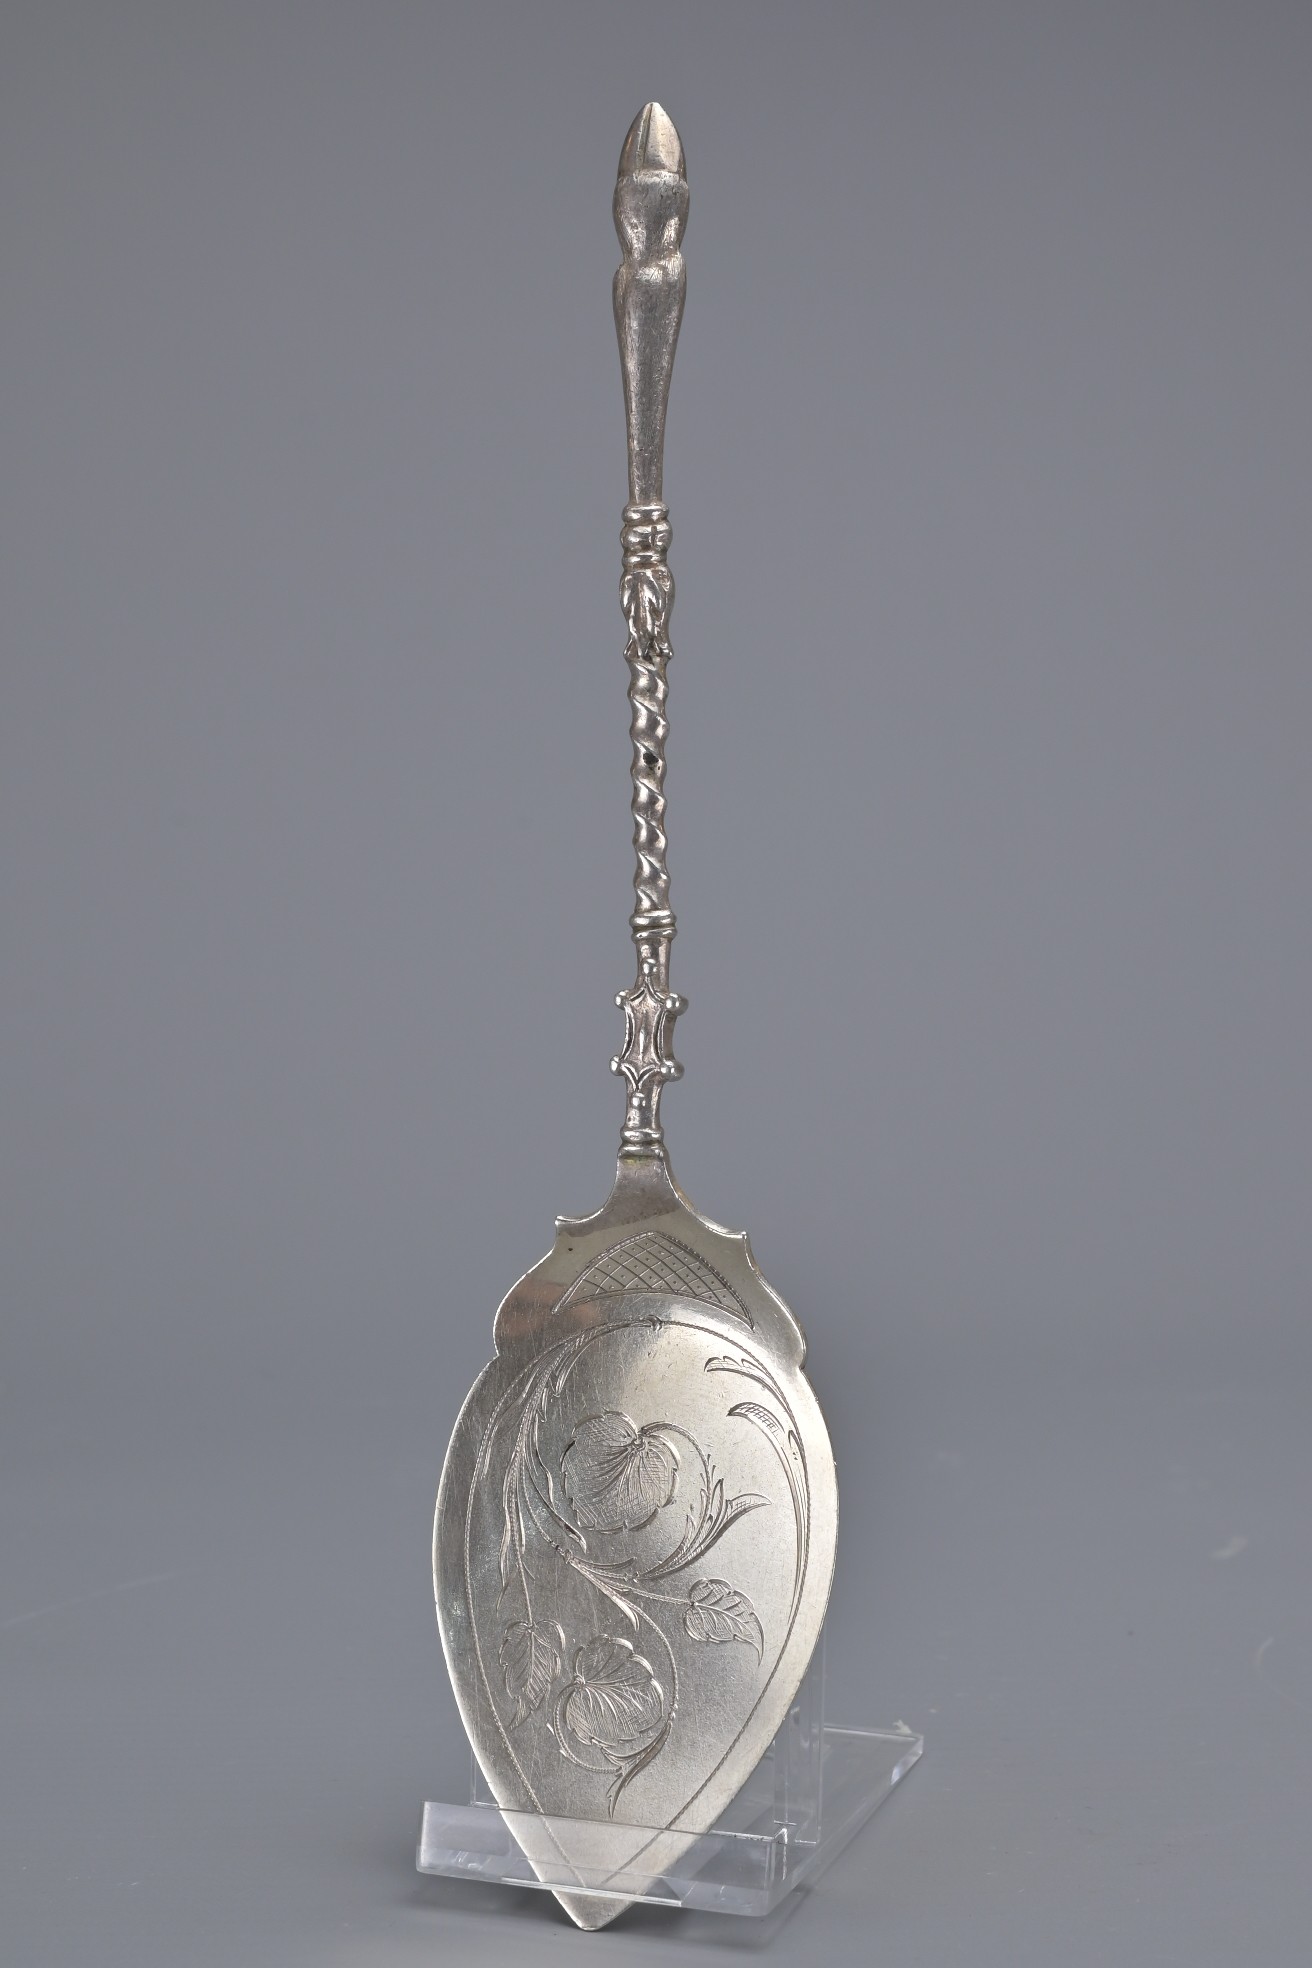 BOXED SET OF SILVER HALLMARKED SPOONS AND PRESERVE SPOON - Image 3 of 6